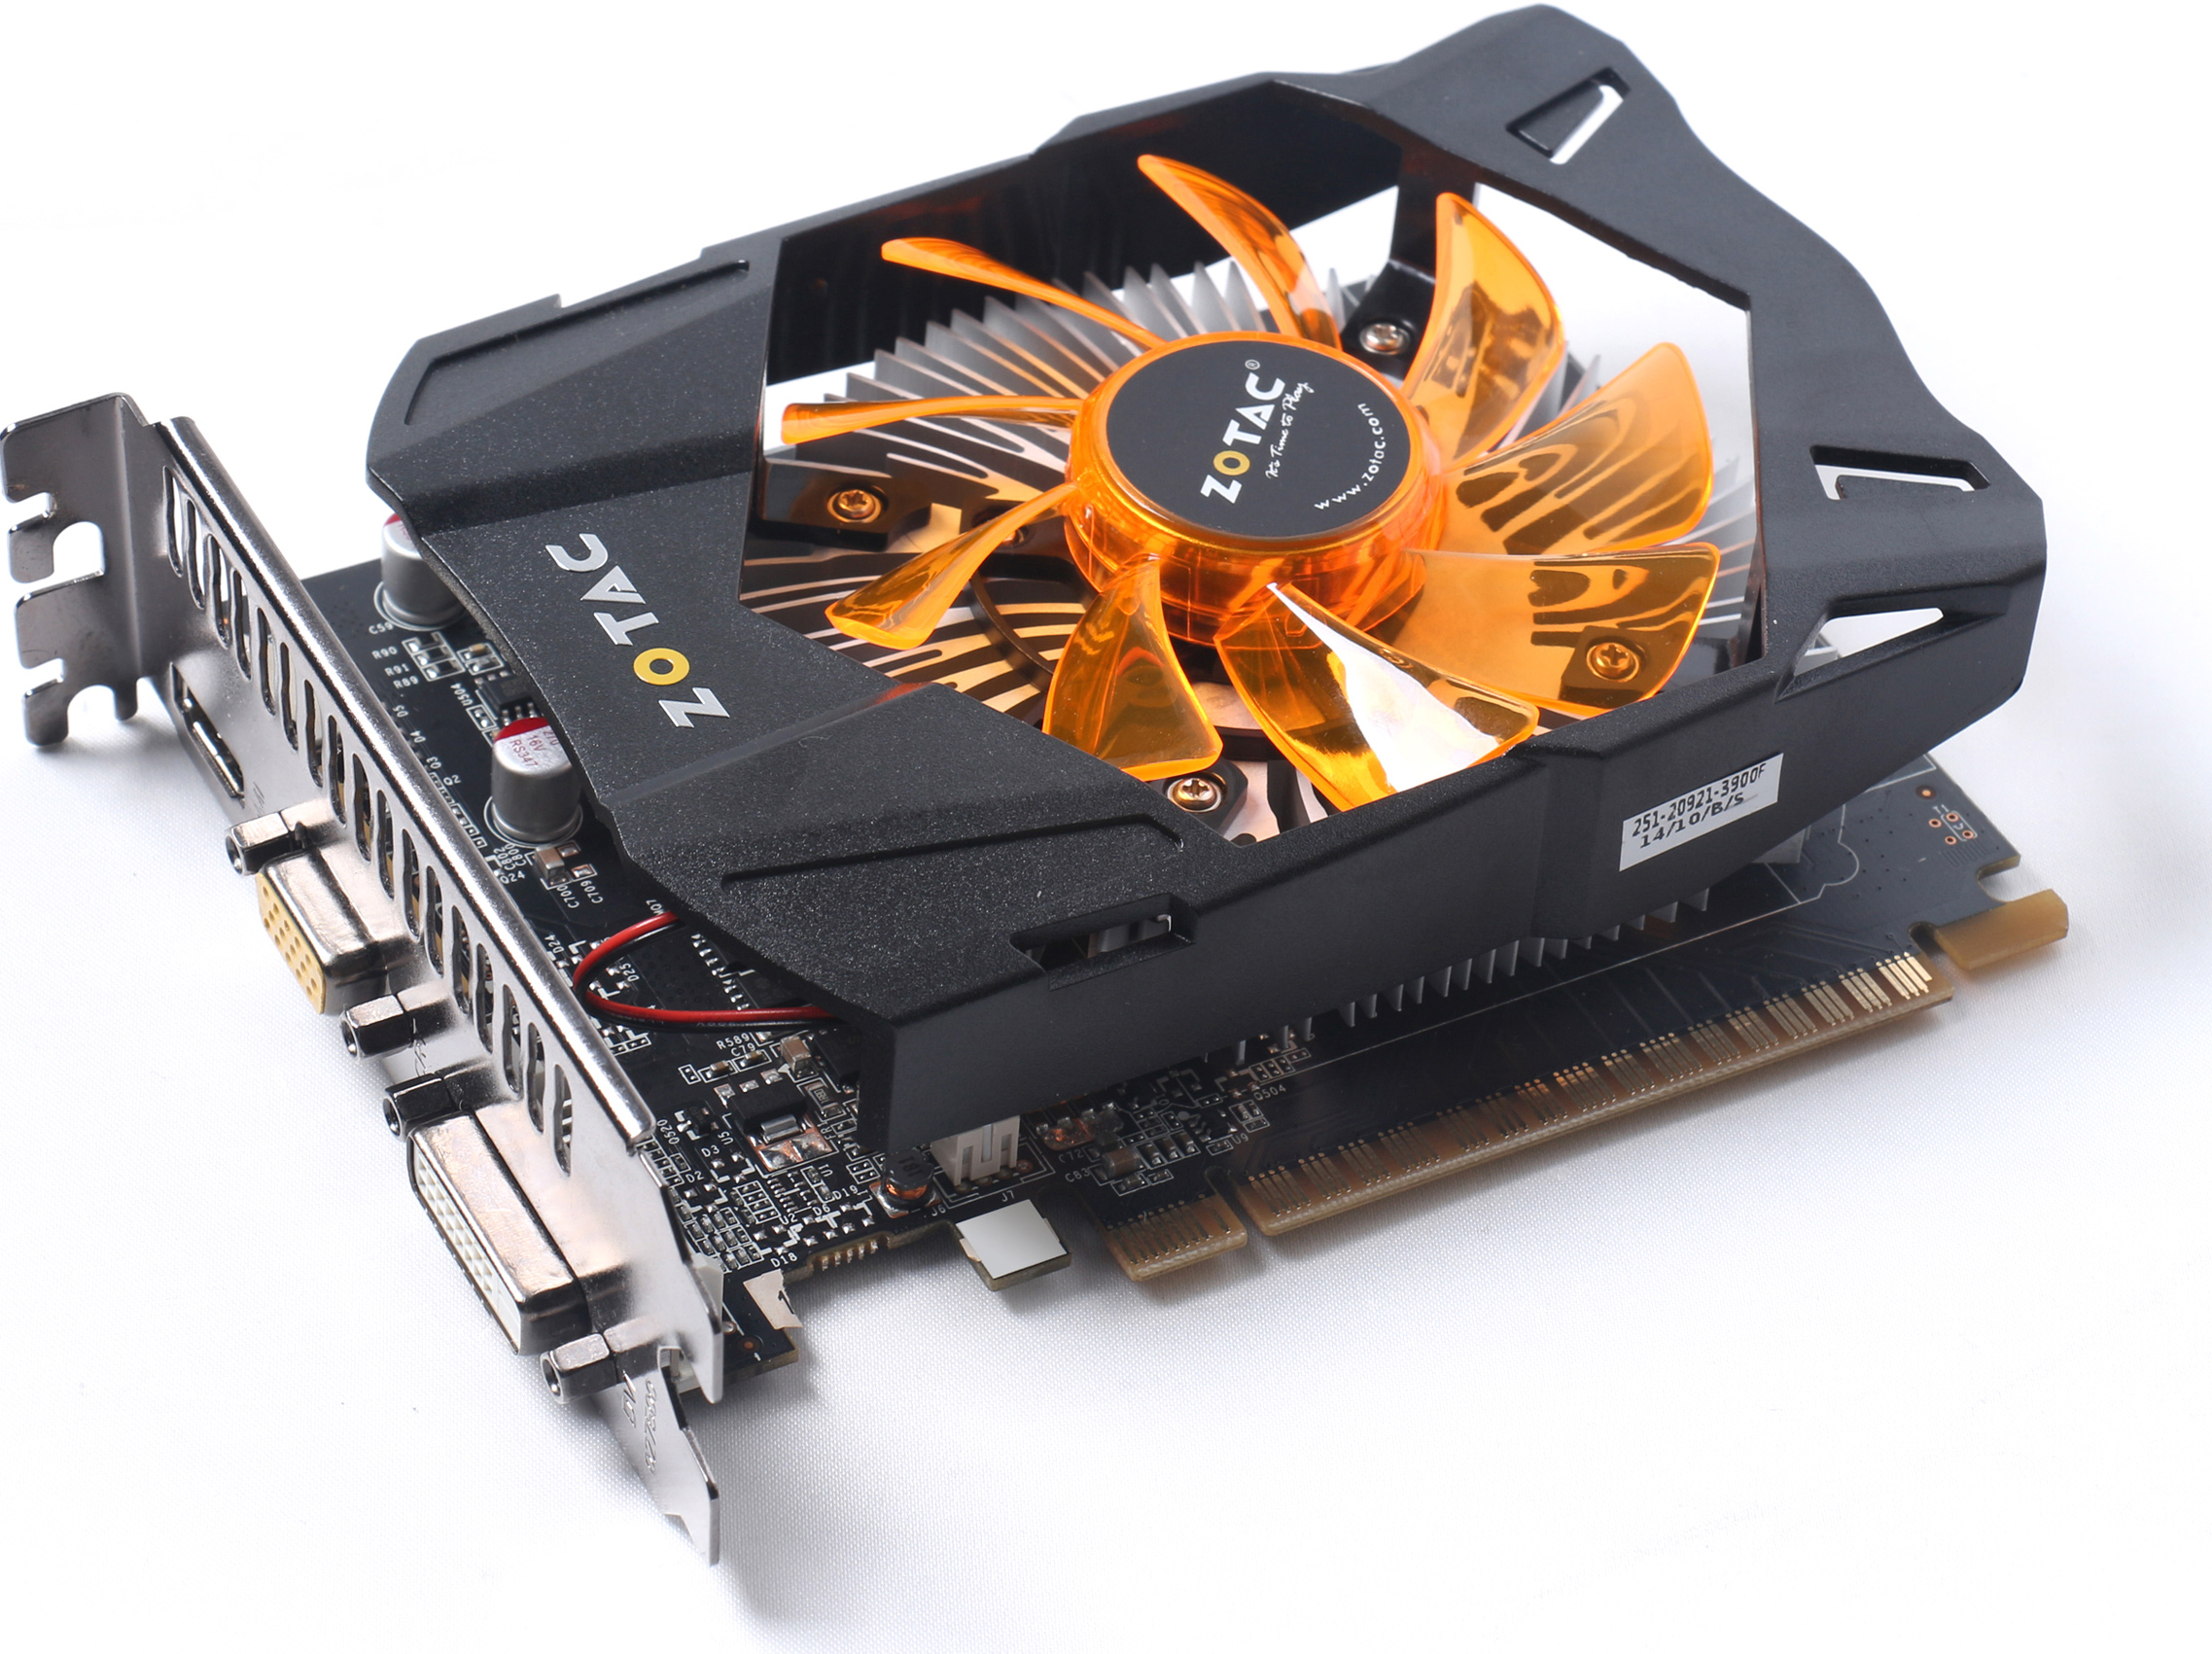 Nvidia and partners roll-out GeForce GT 740 graphics cards ...